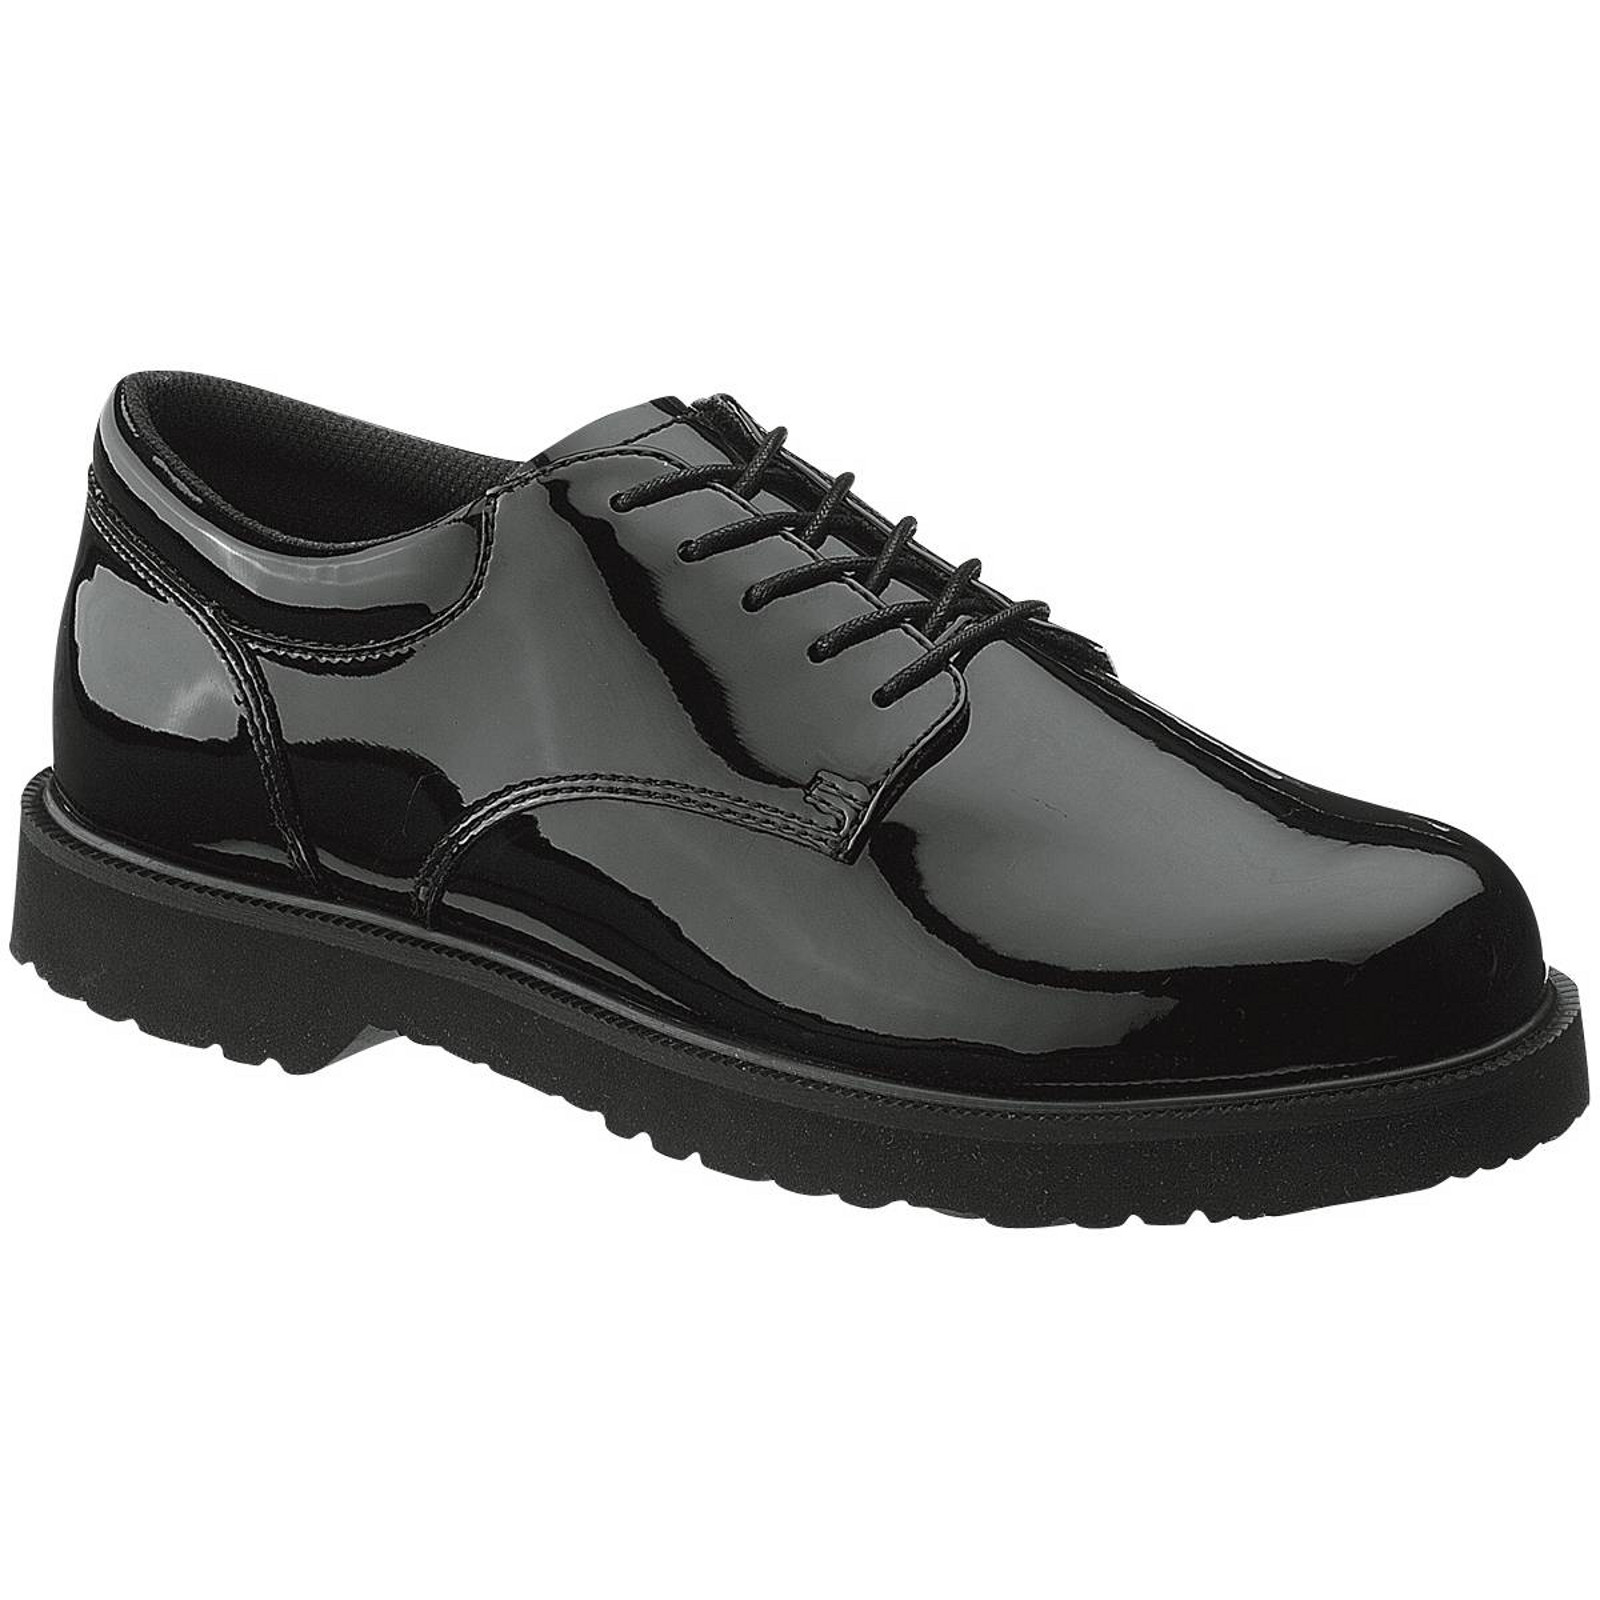 Bates Women's High Gloss Duty Black Oxford Shoes #22741 - Wide Width Available